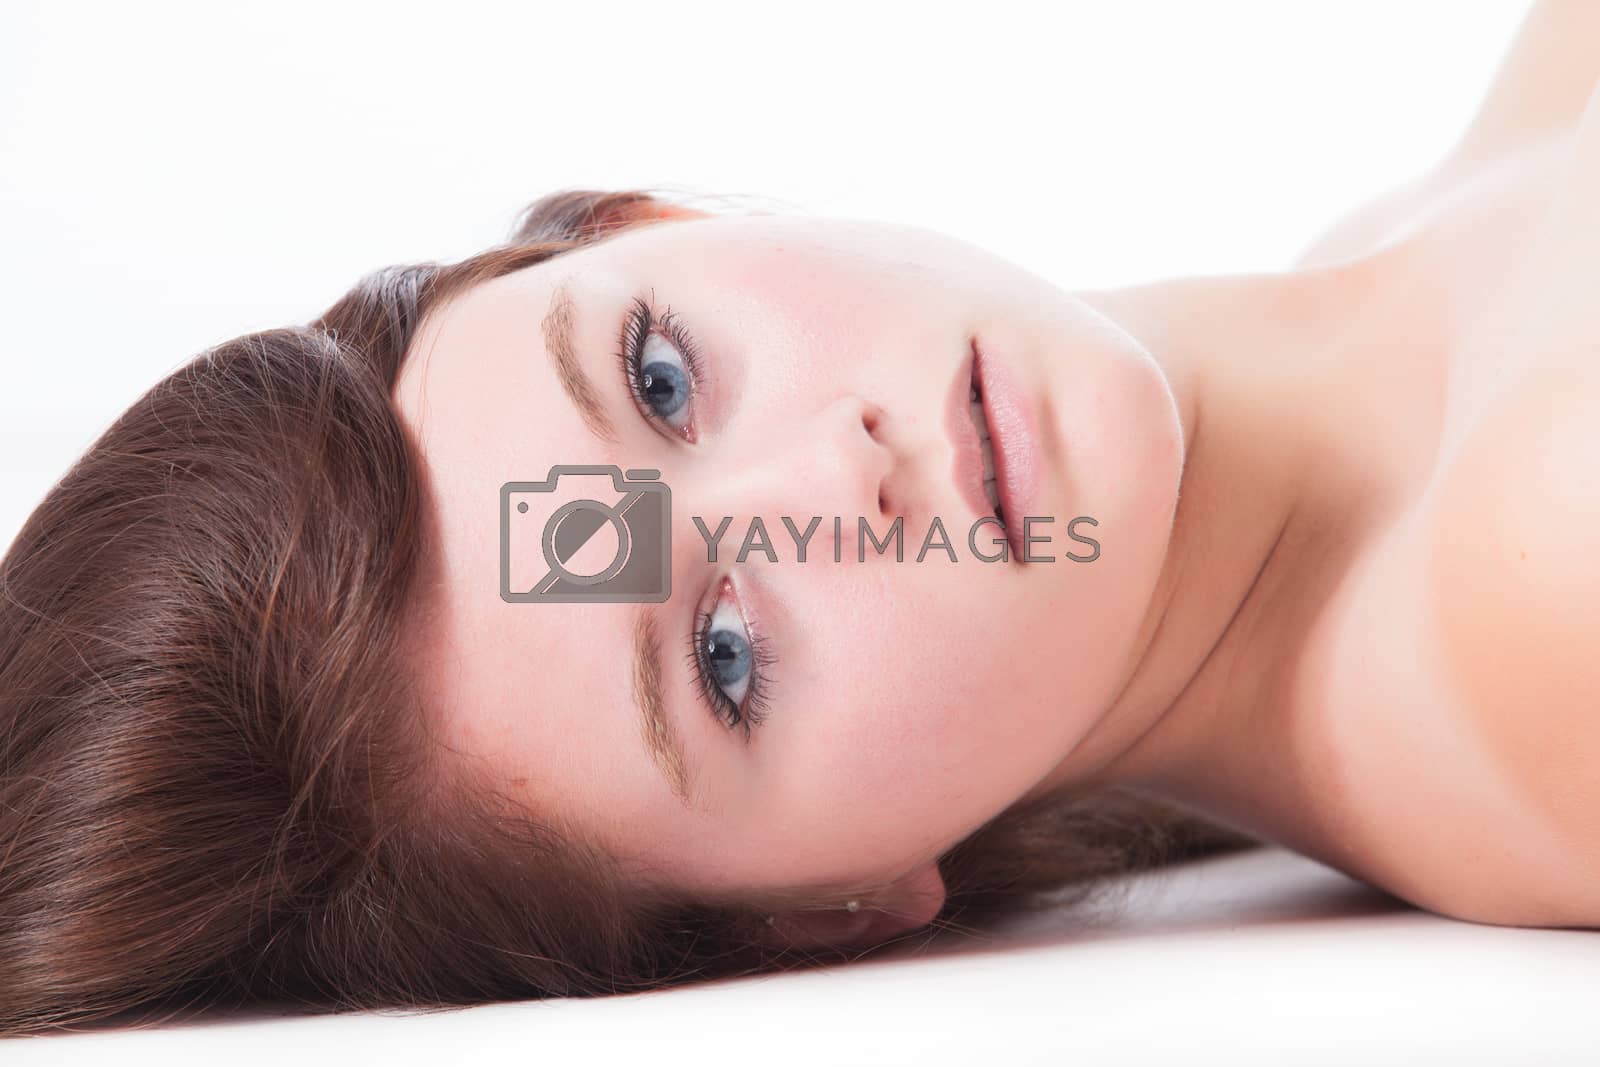 Royalty free image of Face only from a young woman by DNFStyle